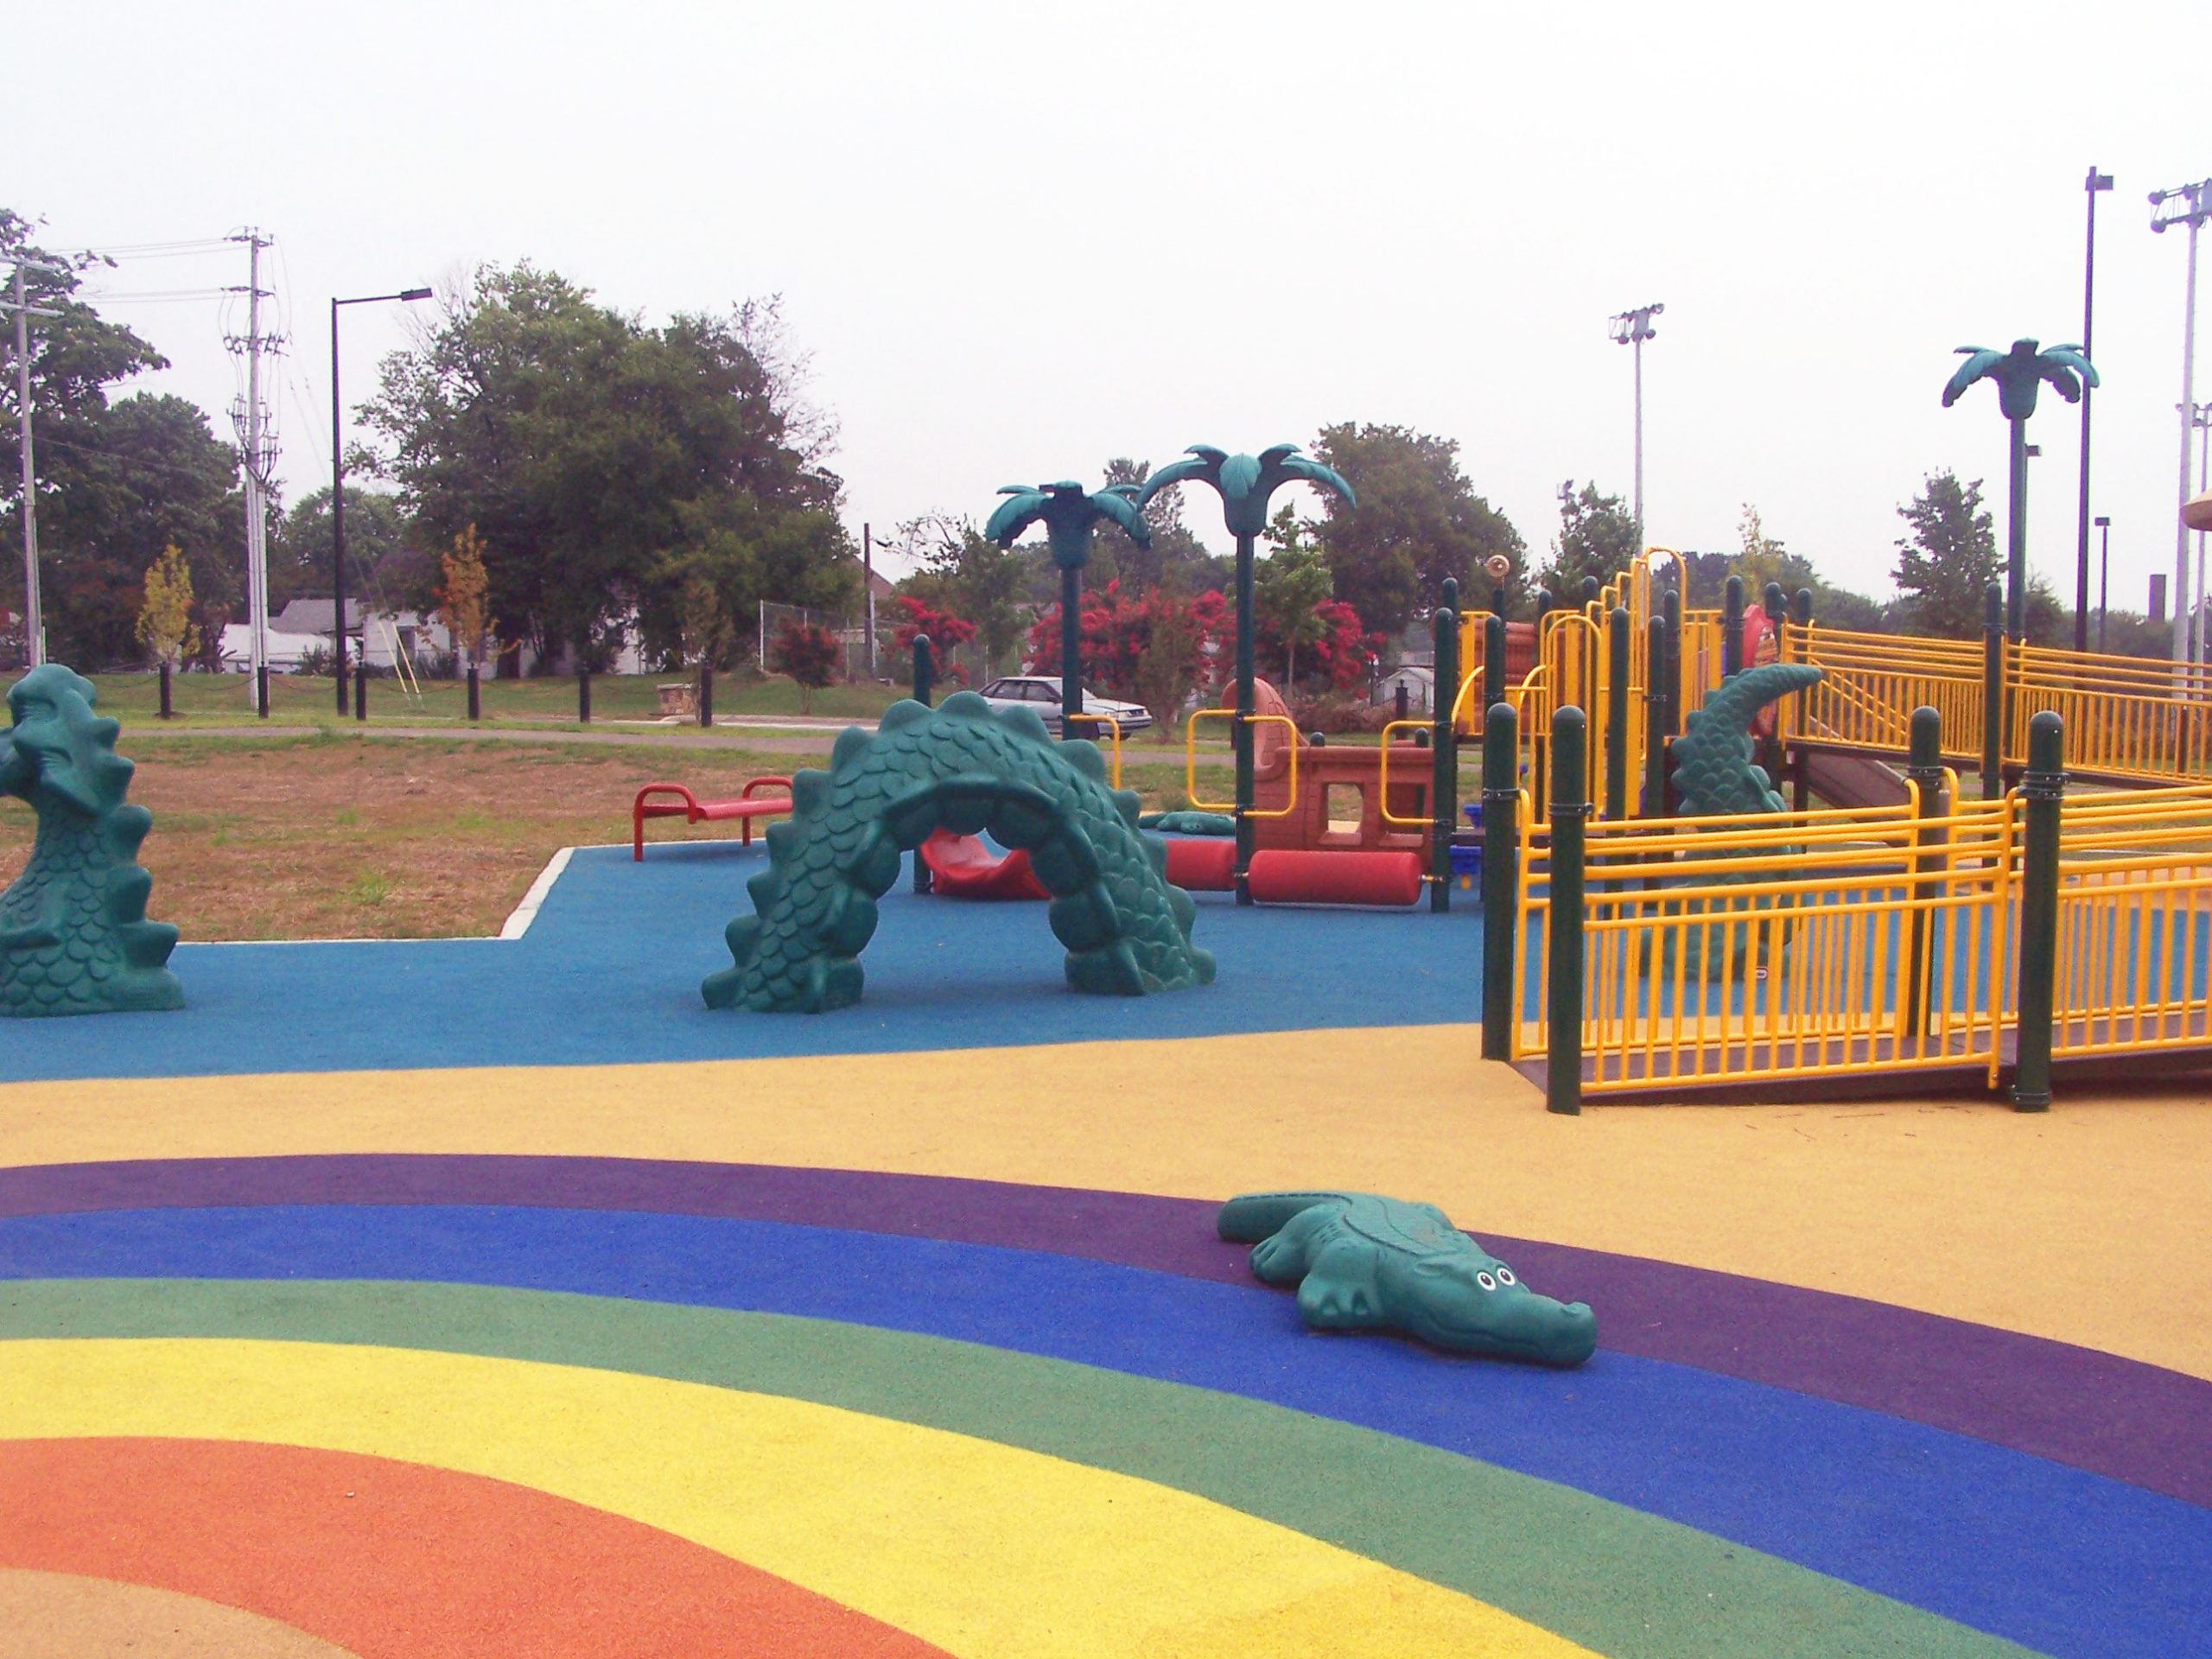 dRC designed and built the Ashley Nicole Dream Playground located at 620 Winona St Knoxville, TN 37917, which opened with a ribbon cutting ceremony in 2005. This accessible playground was designed for all children to grow and play together in an accepting and inclusive environment where “all” kids can develop positive friendships and learn kindness toward one another.